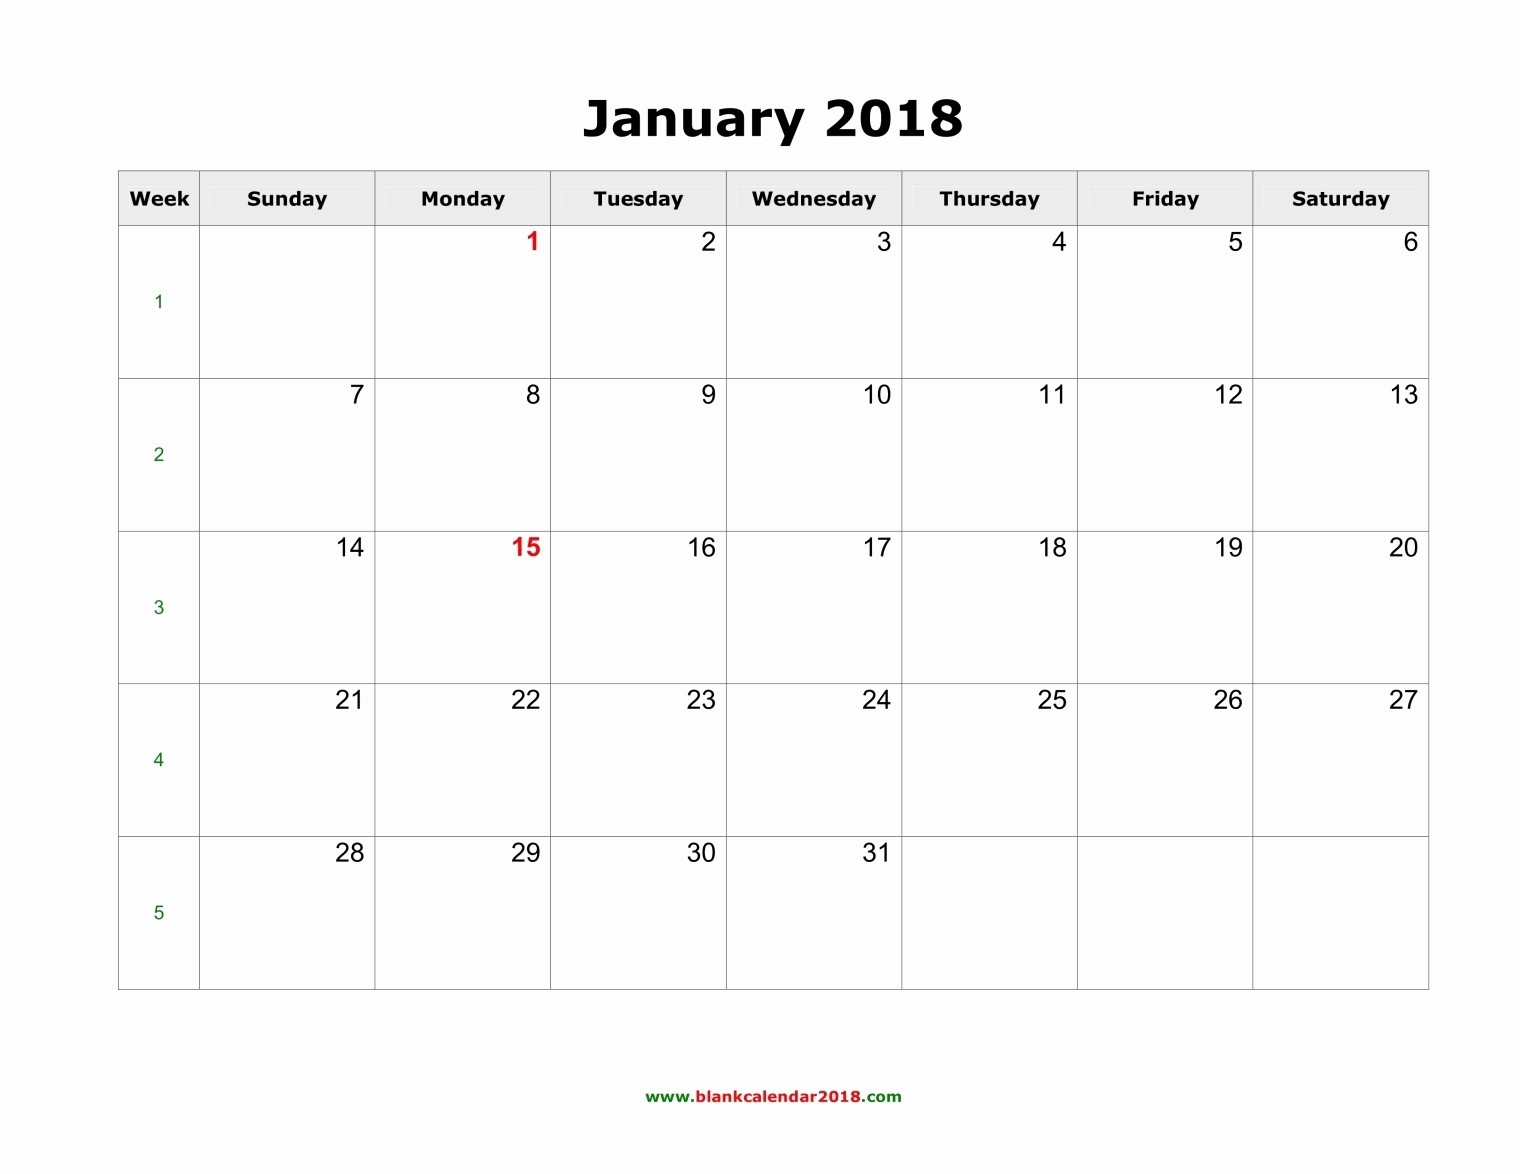 Month by Month Calendar Template Awesome 2018 Monthly Calendar Template